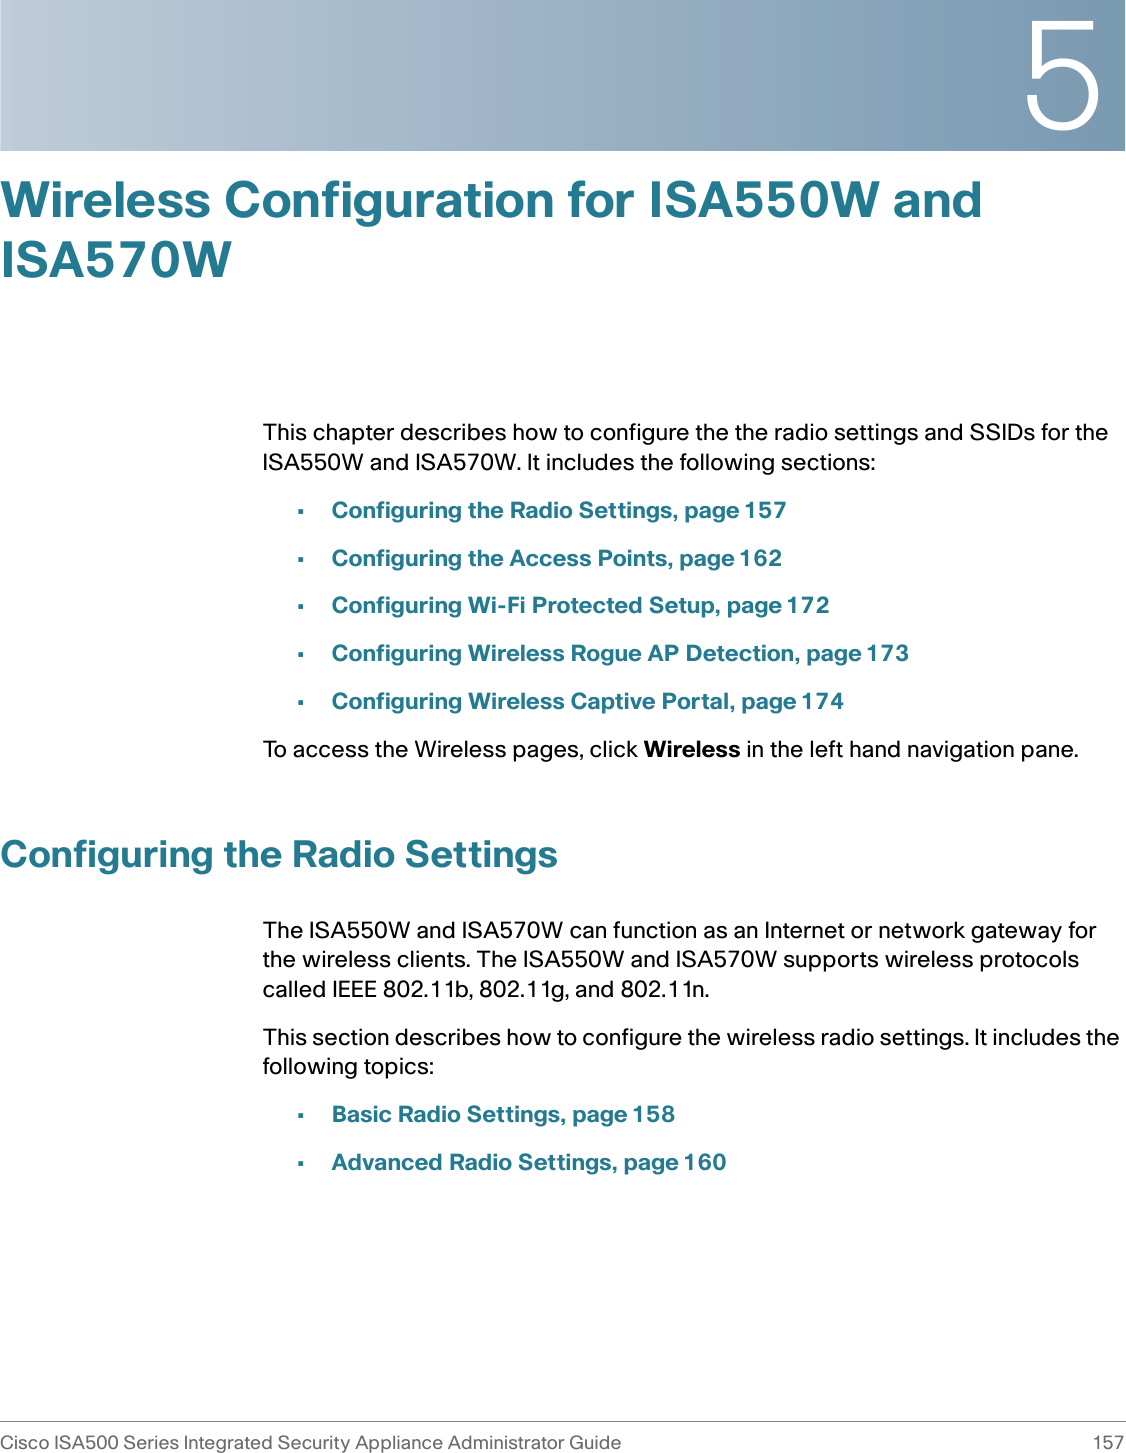 5Cisco ISA500 Series Integrated Security Appliance Administrator Guide 157 Wireless Configuration for ISA550W and ISA570WThis chapter describes how to configure the the radio settings and SSIDs for the ISA550W and ISA570W. It includes the following sections: •Configuring the Radio Settings, page 157•Configuring the Access Points, page 162•Configuring Wi-Fi Protected Setup, page 172•Configuring Wireless Rogue AP Detection, page 173•Configuring Wireless Captive Portal, page 174To access the Wireless pages, click Wireless in the left hand navigation pane.Configuring the Radio SettingsThe ISA550W and ISA570W can function as an Internet or network gateway for the wireless clients. The ISA550W and ISA570W supports wireless protocols called IEEE 802.11b, 802.11g, and 802.11n. This section describes how to configure the wireless radio settings. It includes the following topics: •Basic Radio Settings, page 158•Advanced Radio Settings, page 160